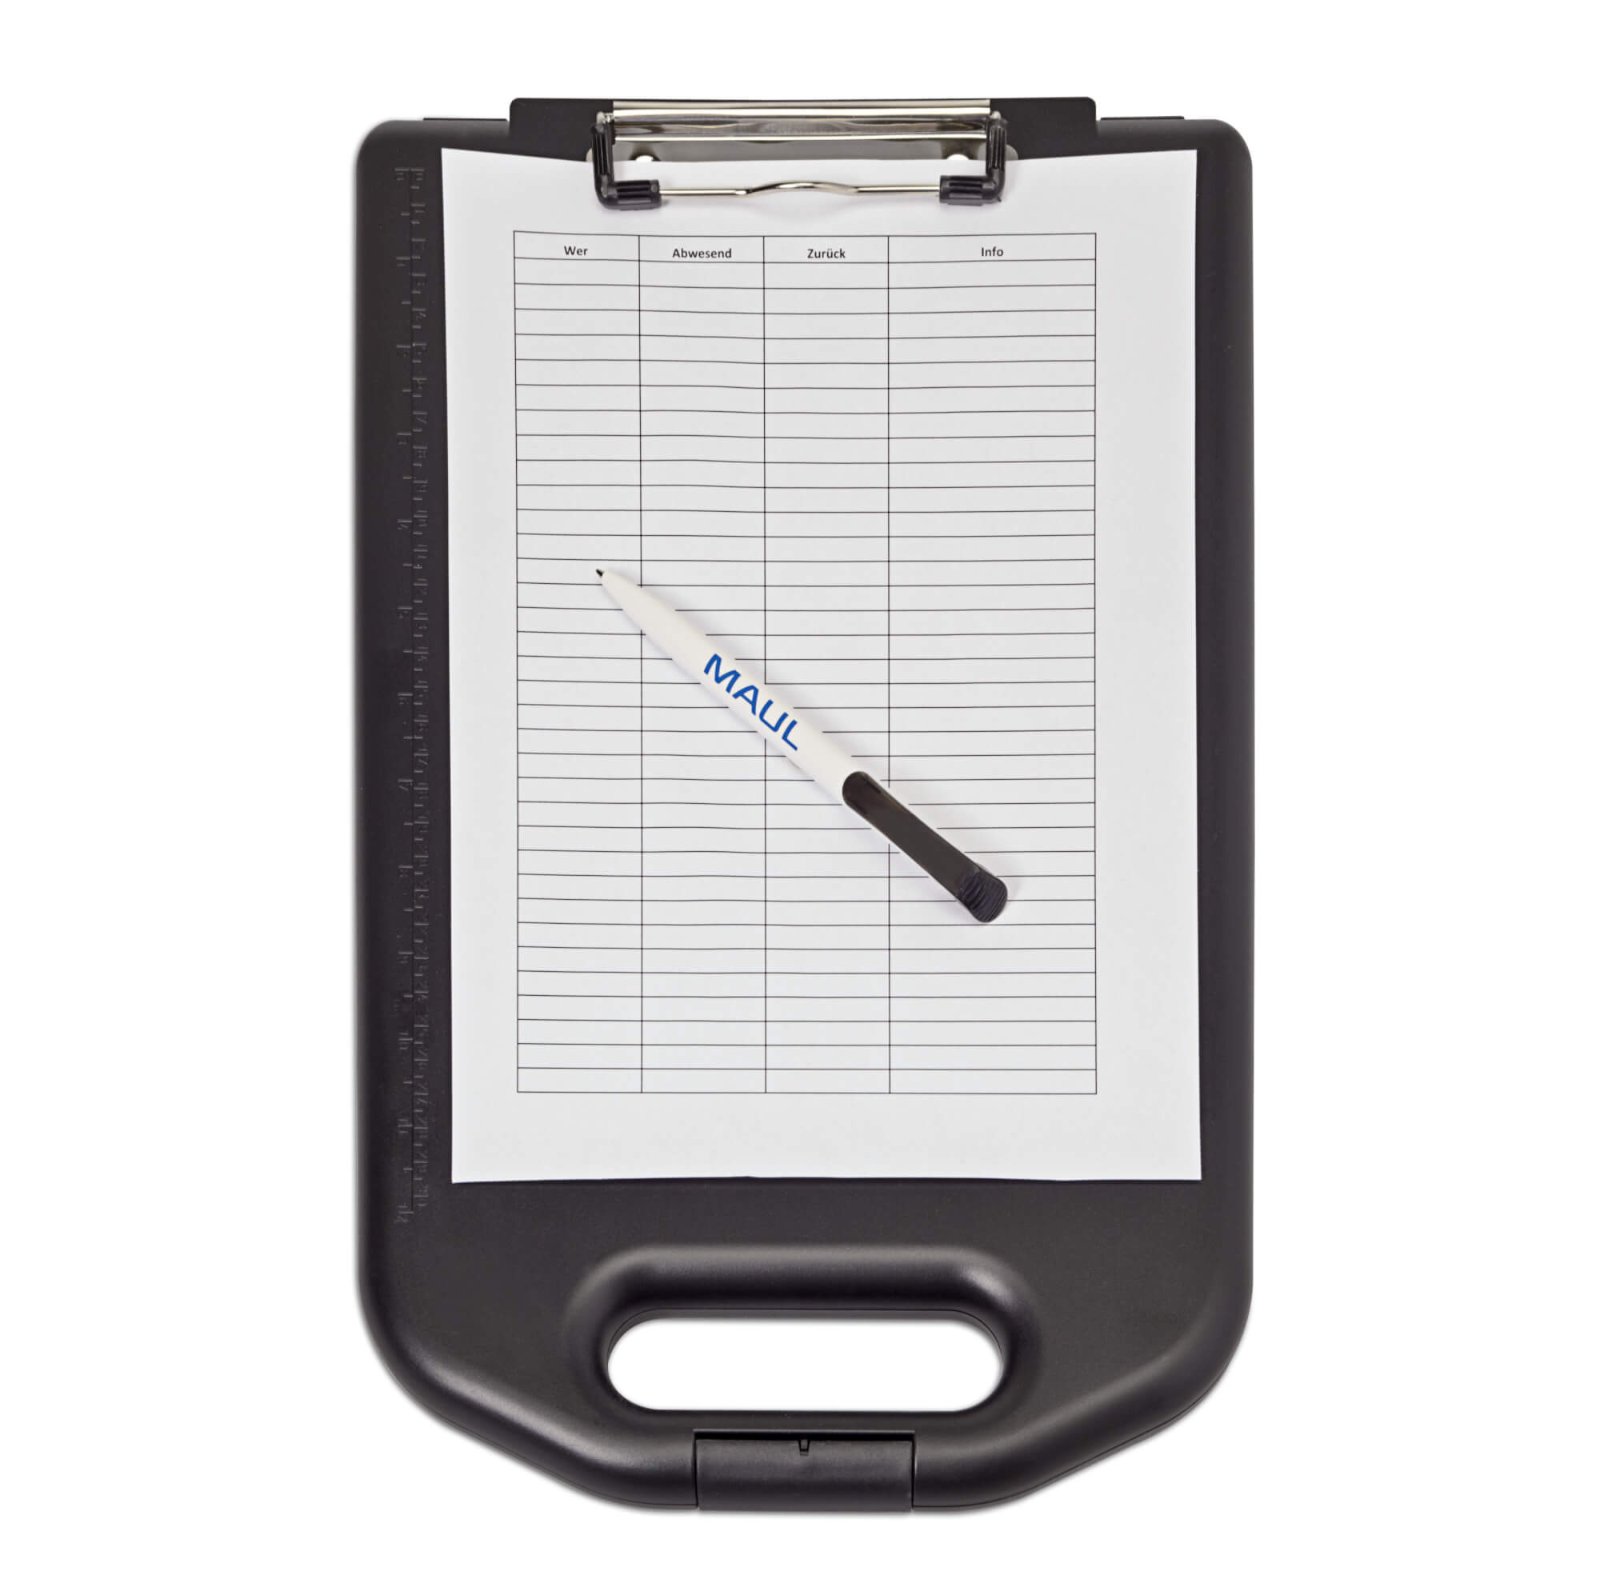 Plastic clipboard with with storage box